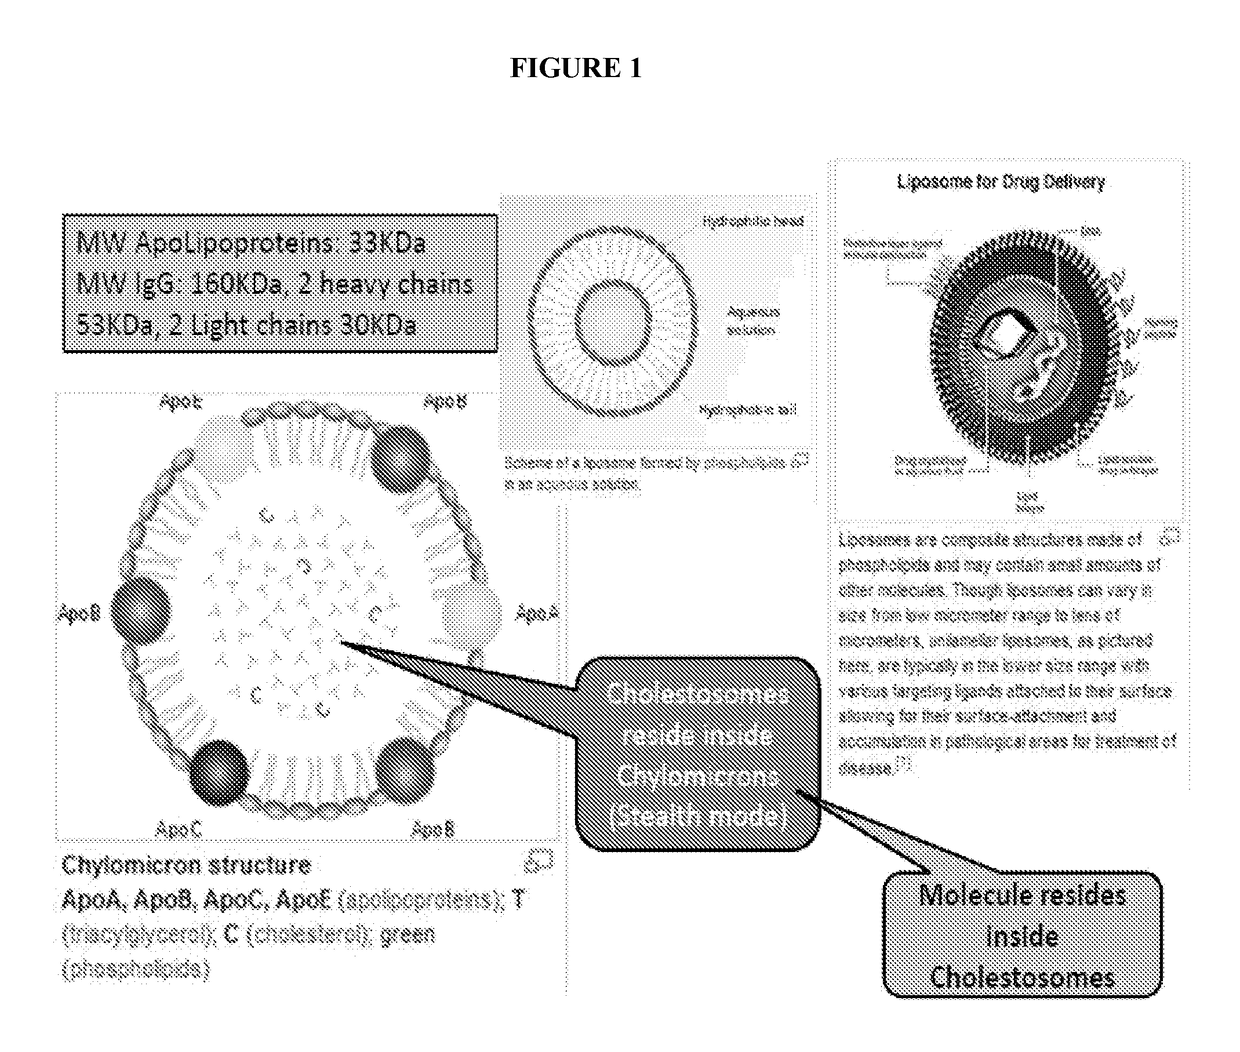 Cholestosome vesicles for incorporation of molecules into chylomicrons